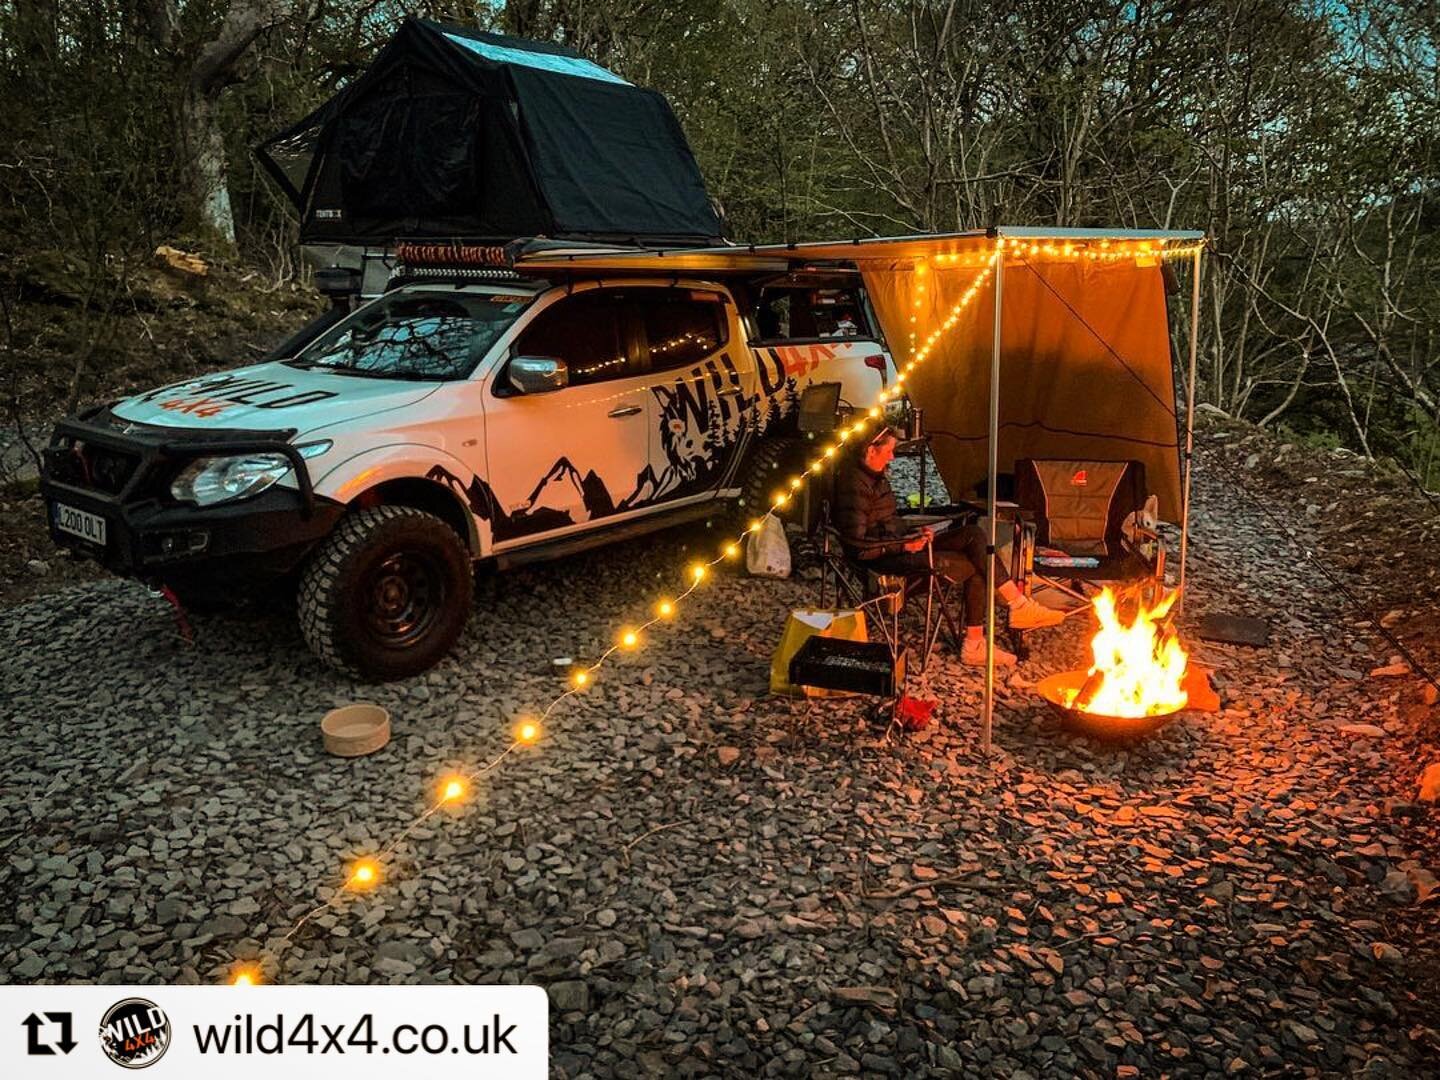 Campfire magic at our wooded pull ins! 

📸@wild4x4.co.uk!